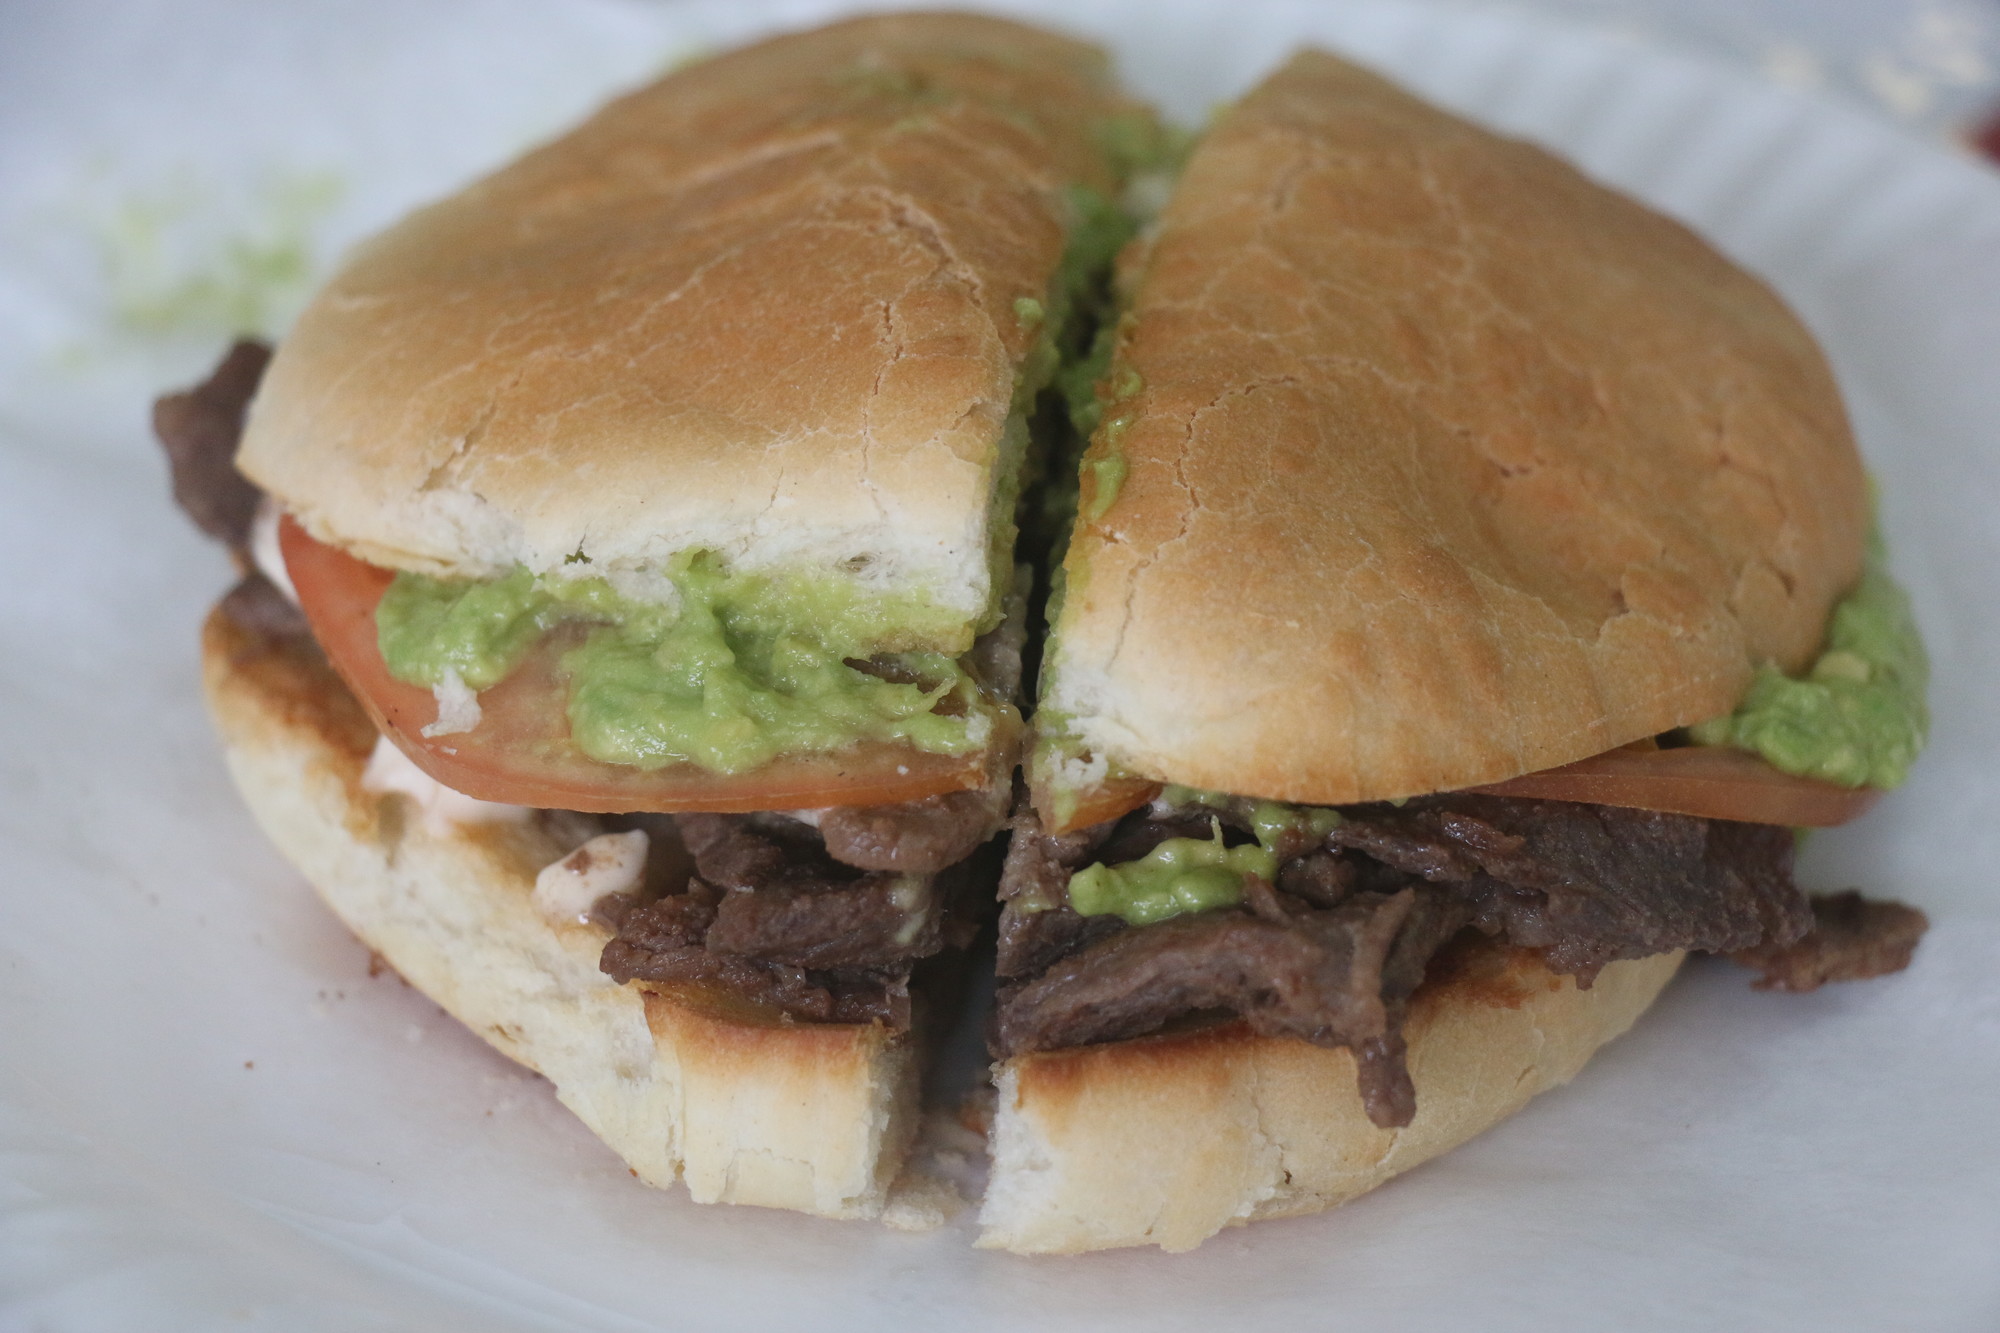 The churrasco, or beef sandwich with avocado, tomato and mayonnaise, is a customer favorite.